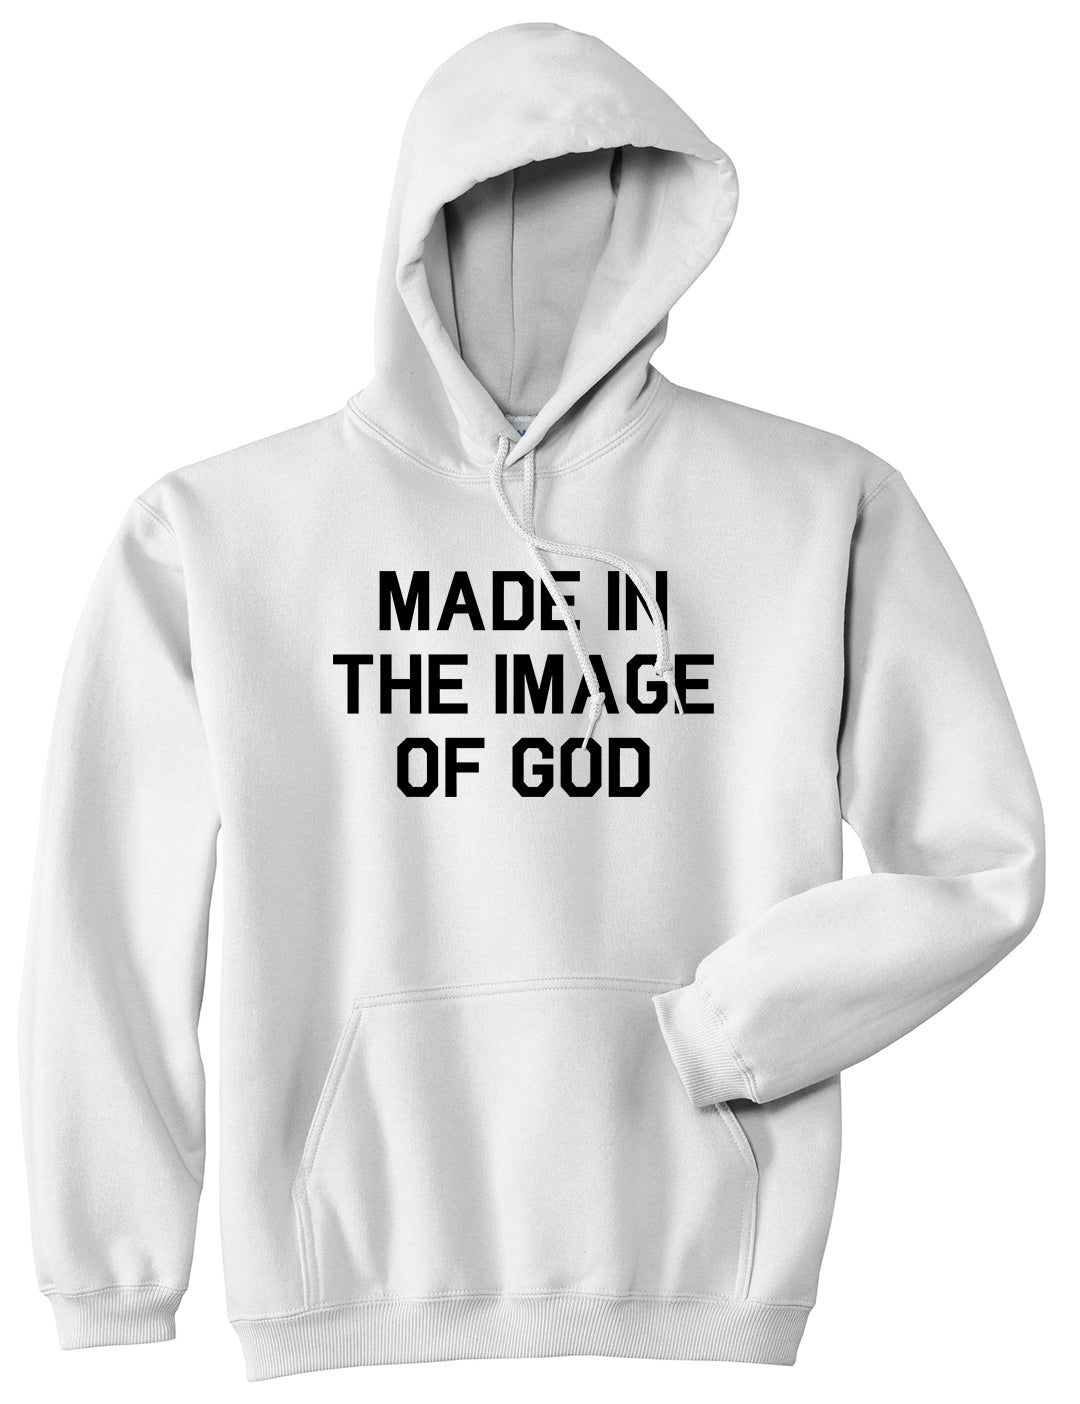 Made In The Image Of God Mens Pullover Hoodie White by Kings Of NY